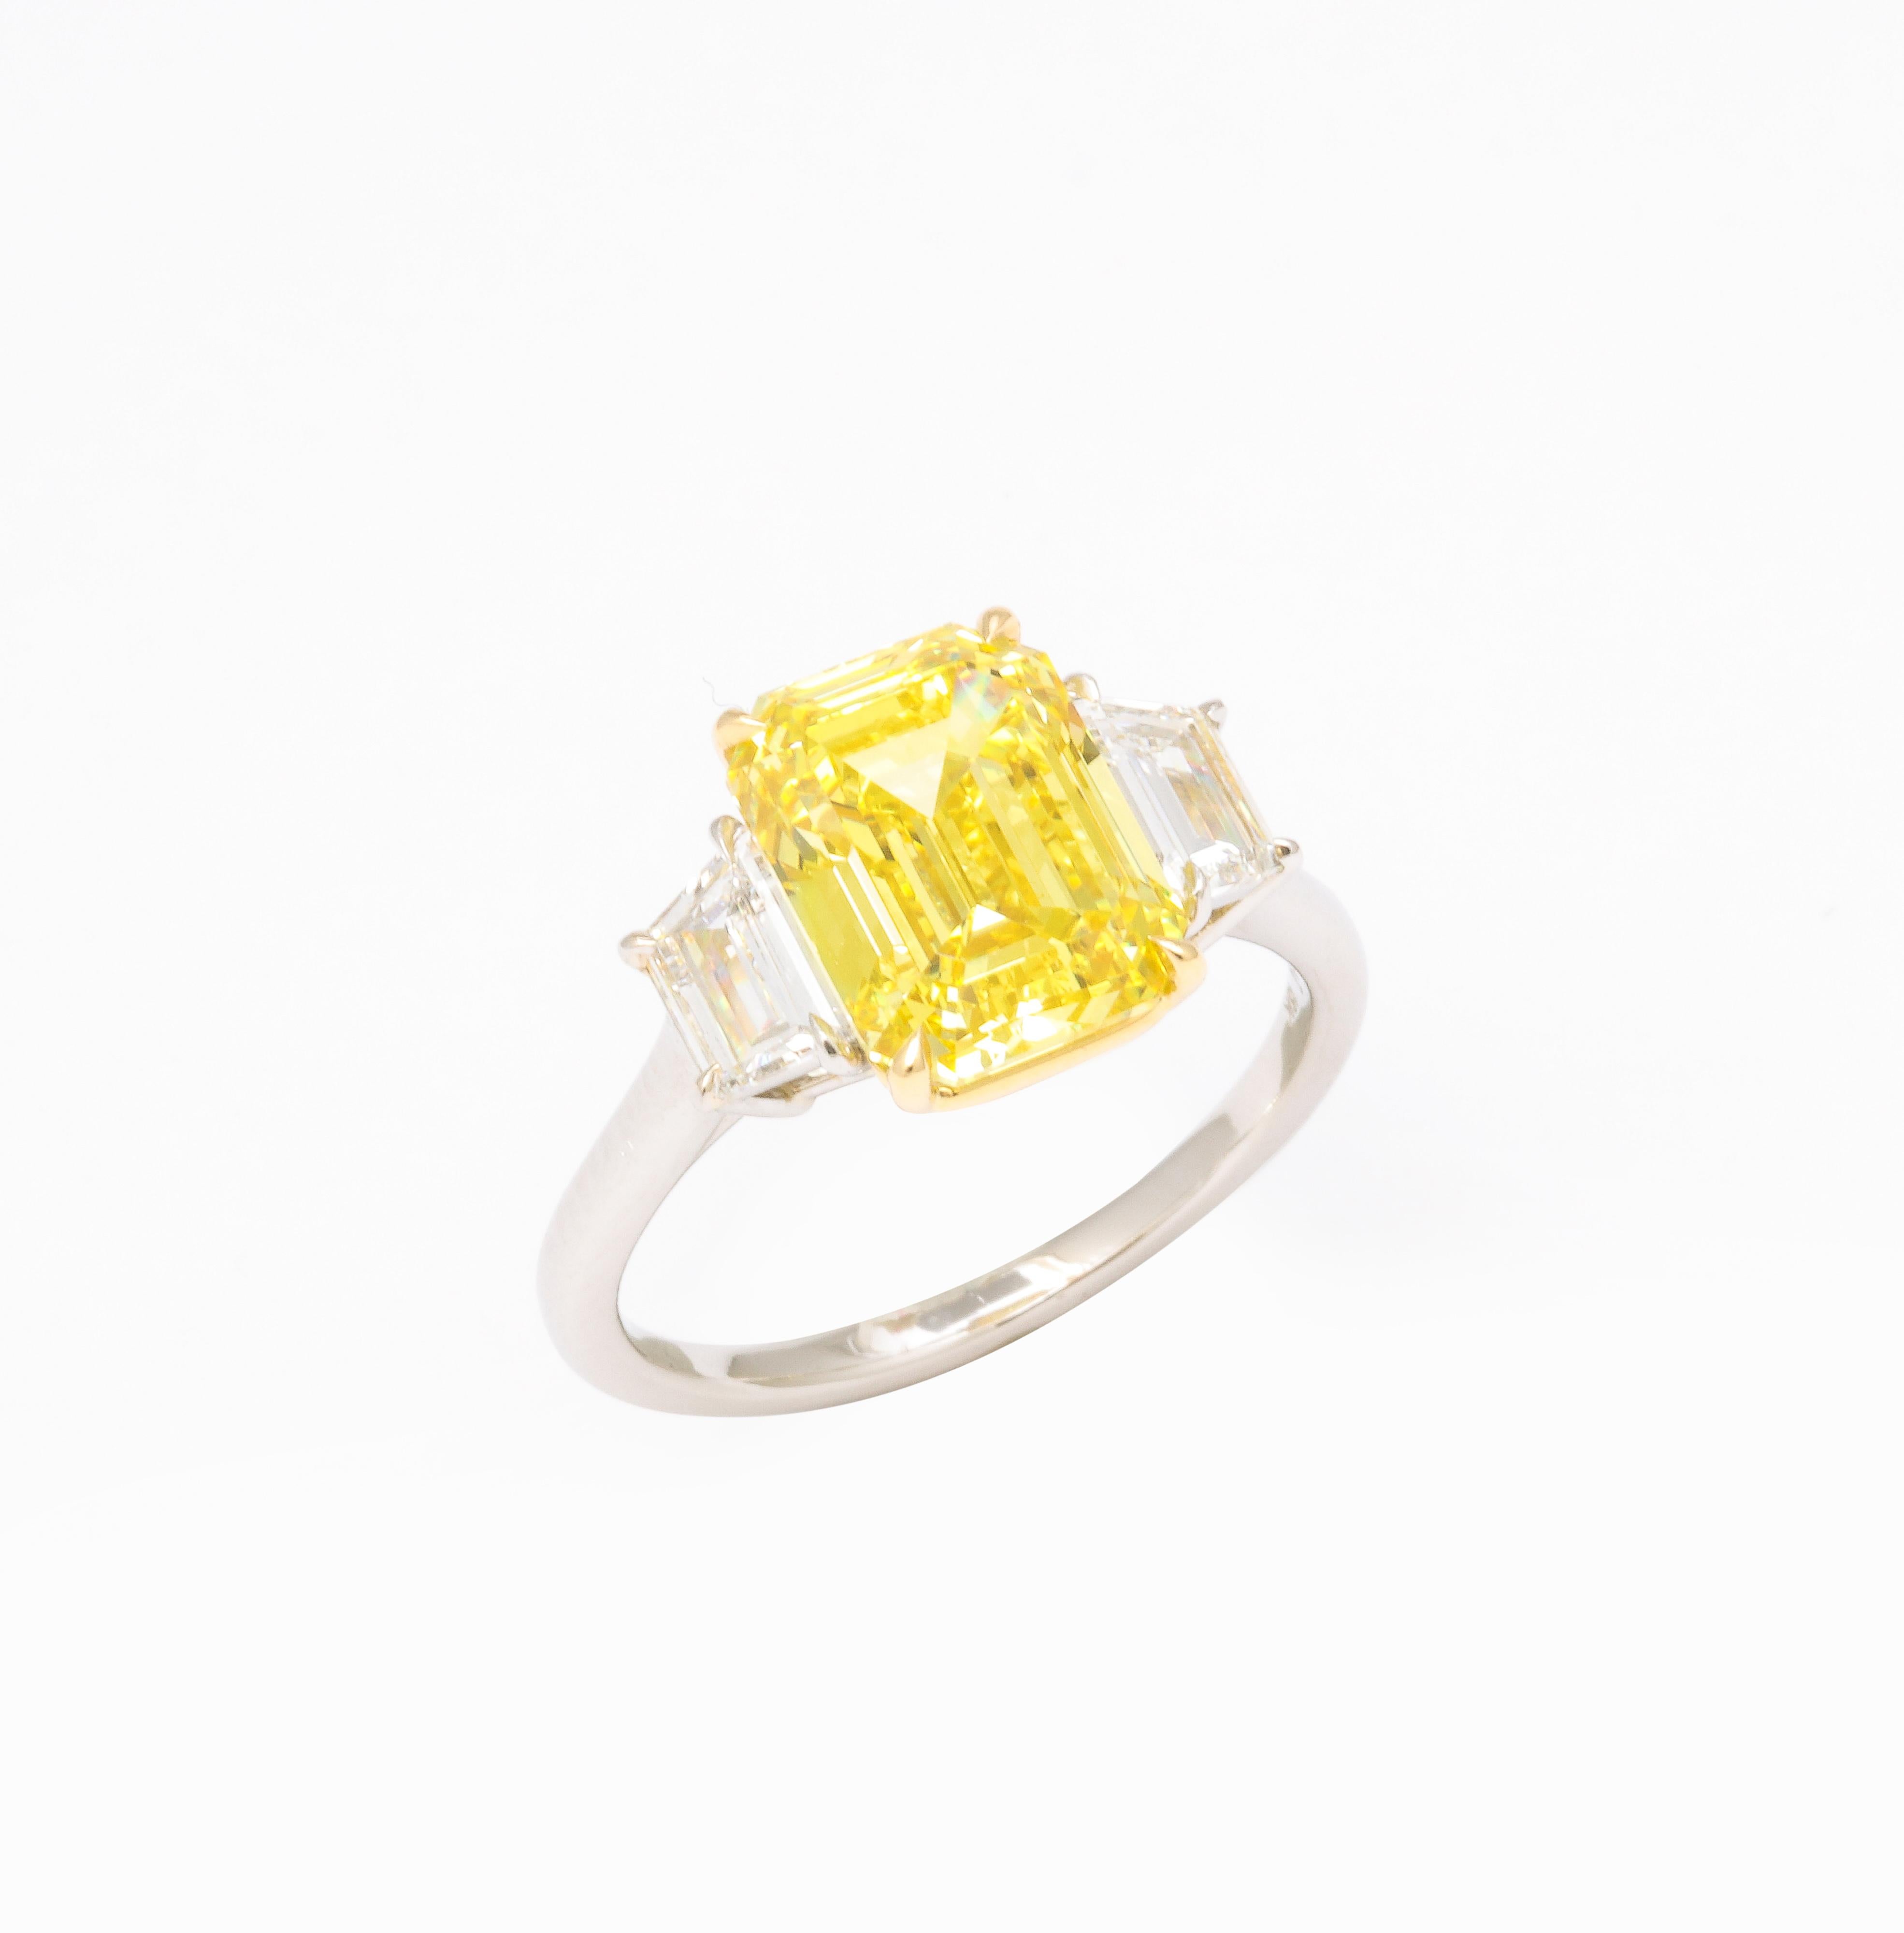 Fancy Vivid Yellow Emerald Cut Ring For Sale 5